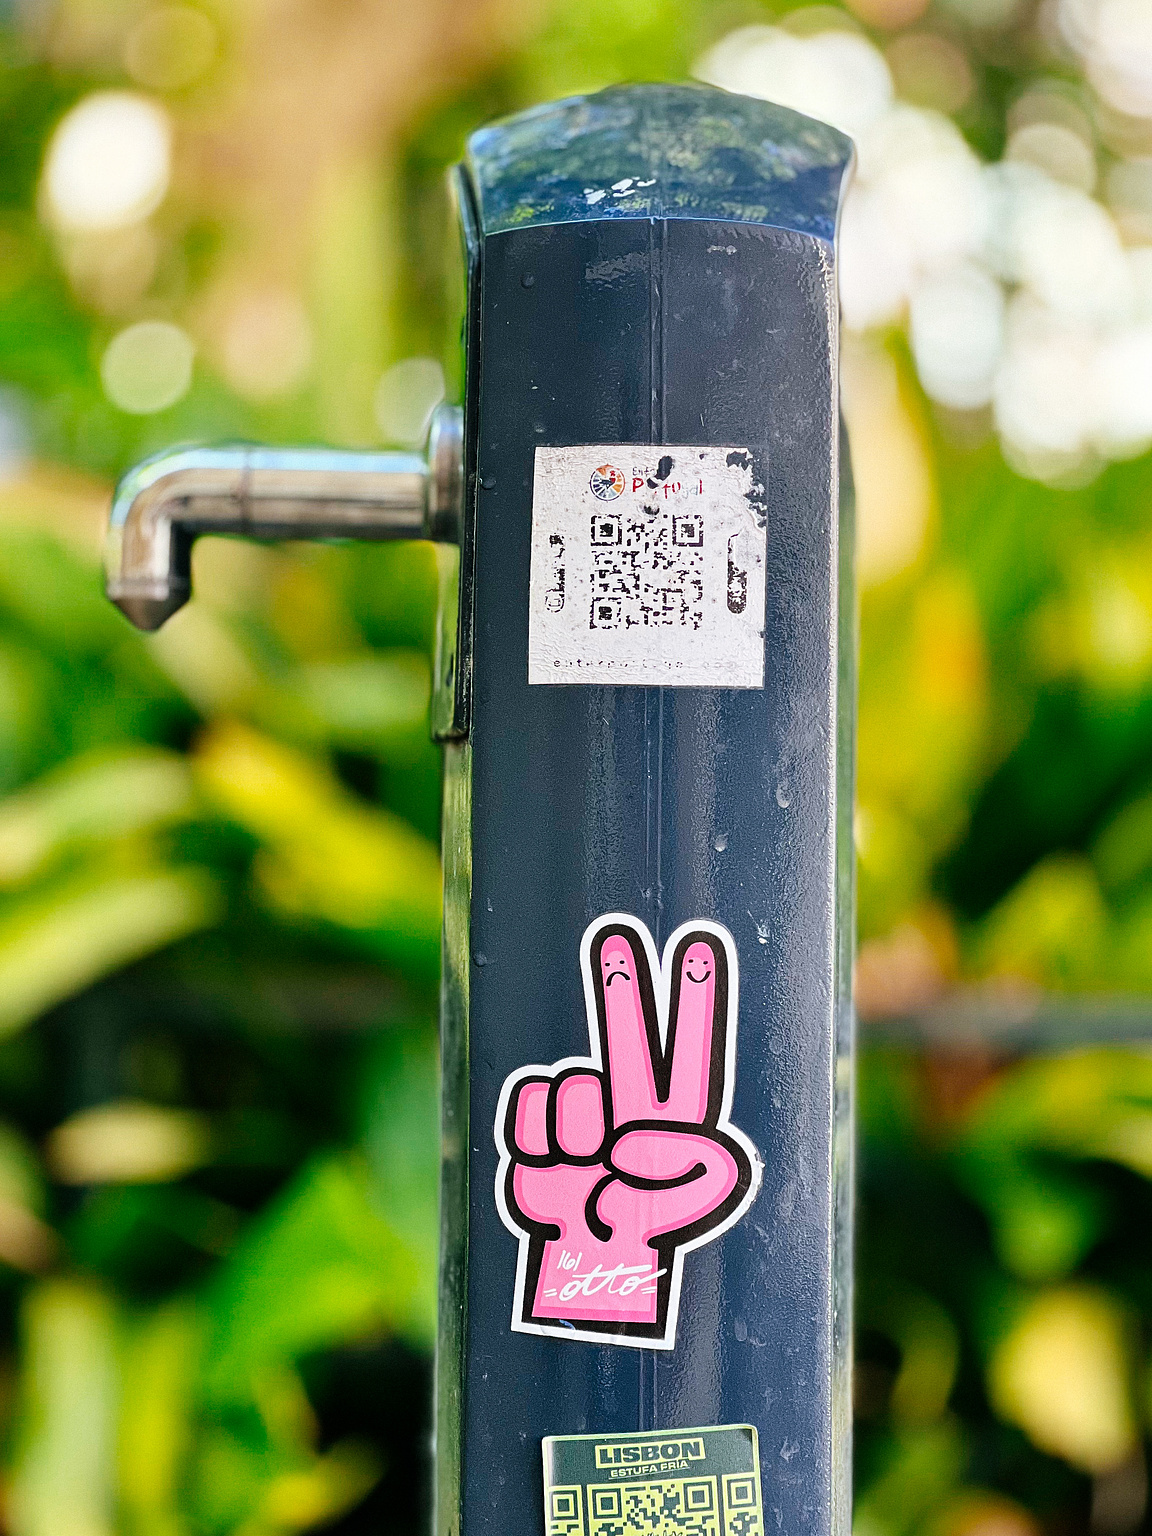 A metal pole with a tap, covered in faded stickers, against a blurred green foliage background.